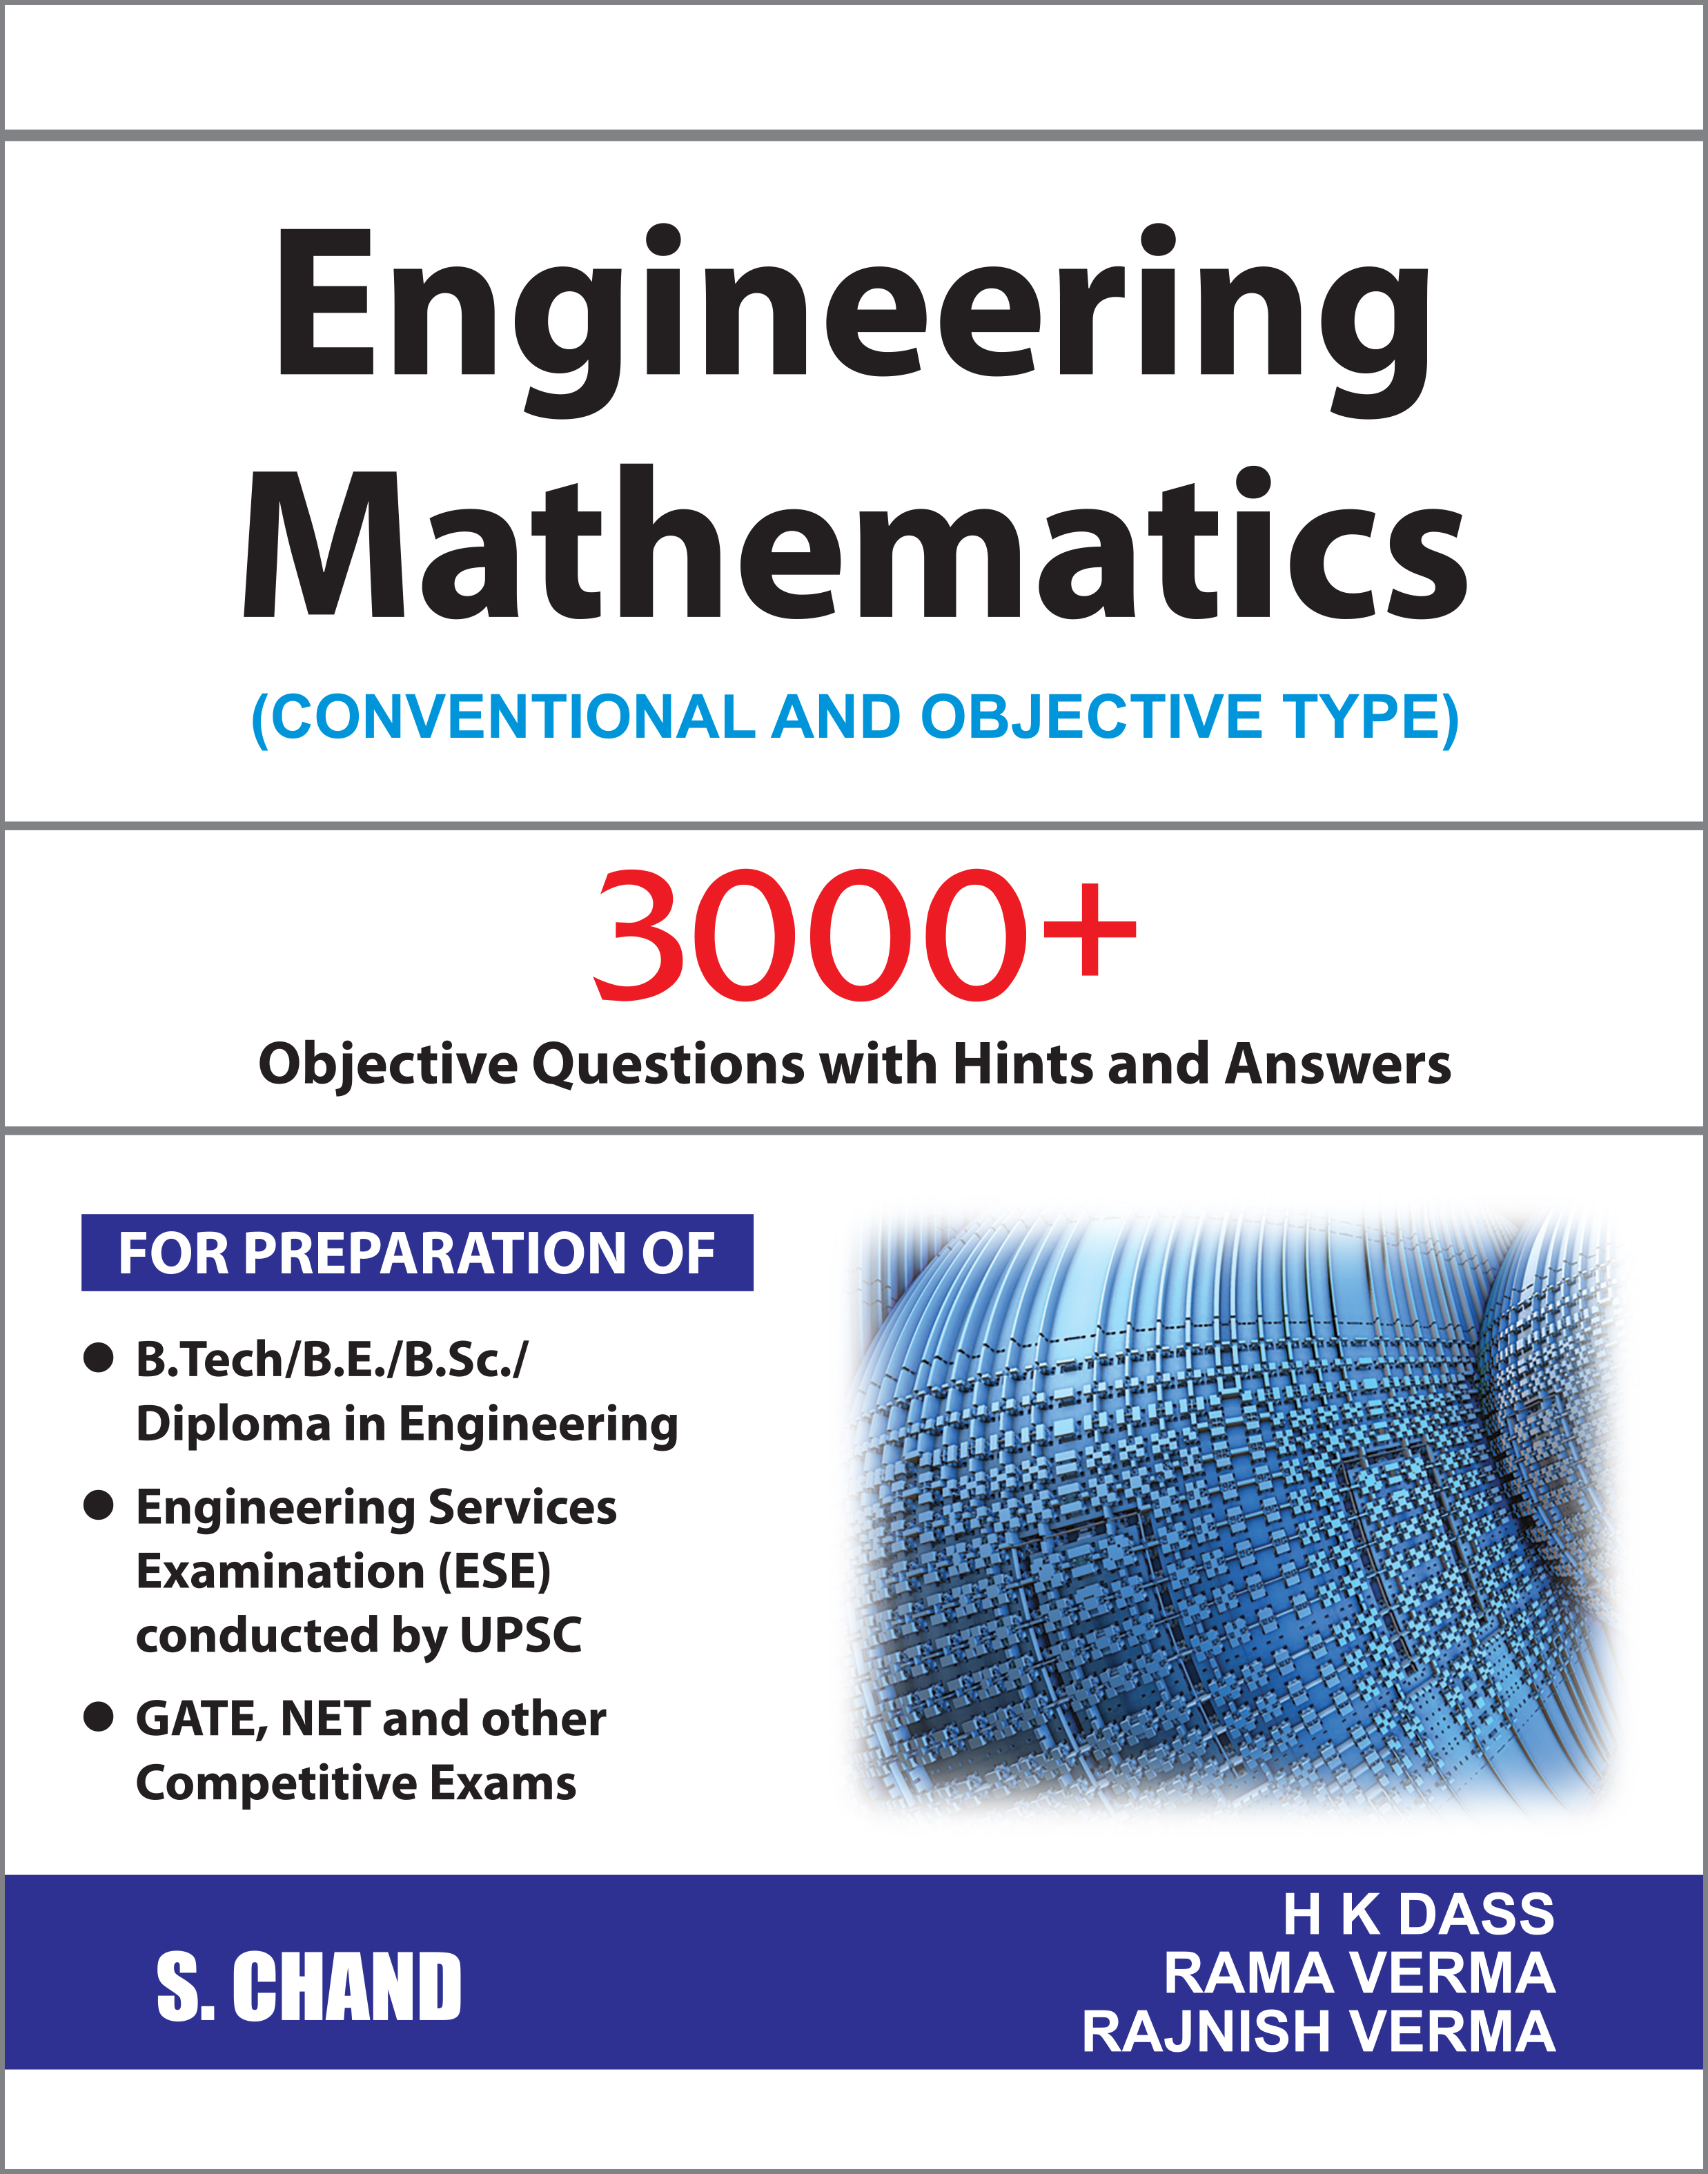 Engineering Mathematics (Conventional and Objective Type)